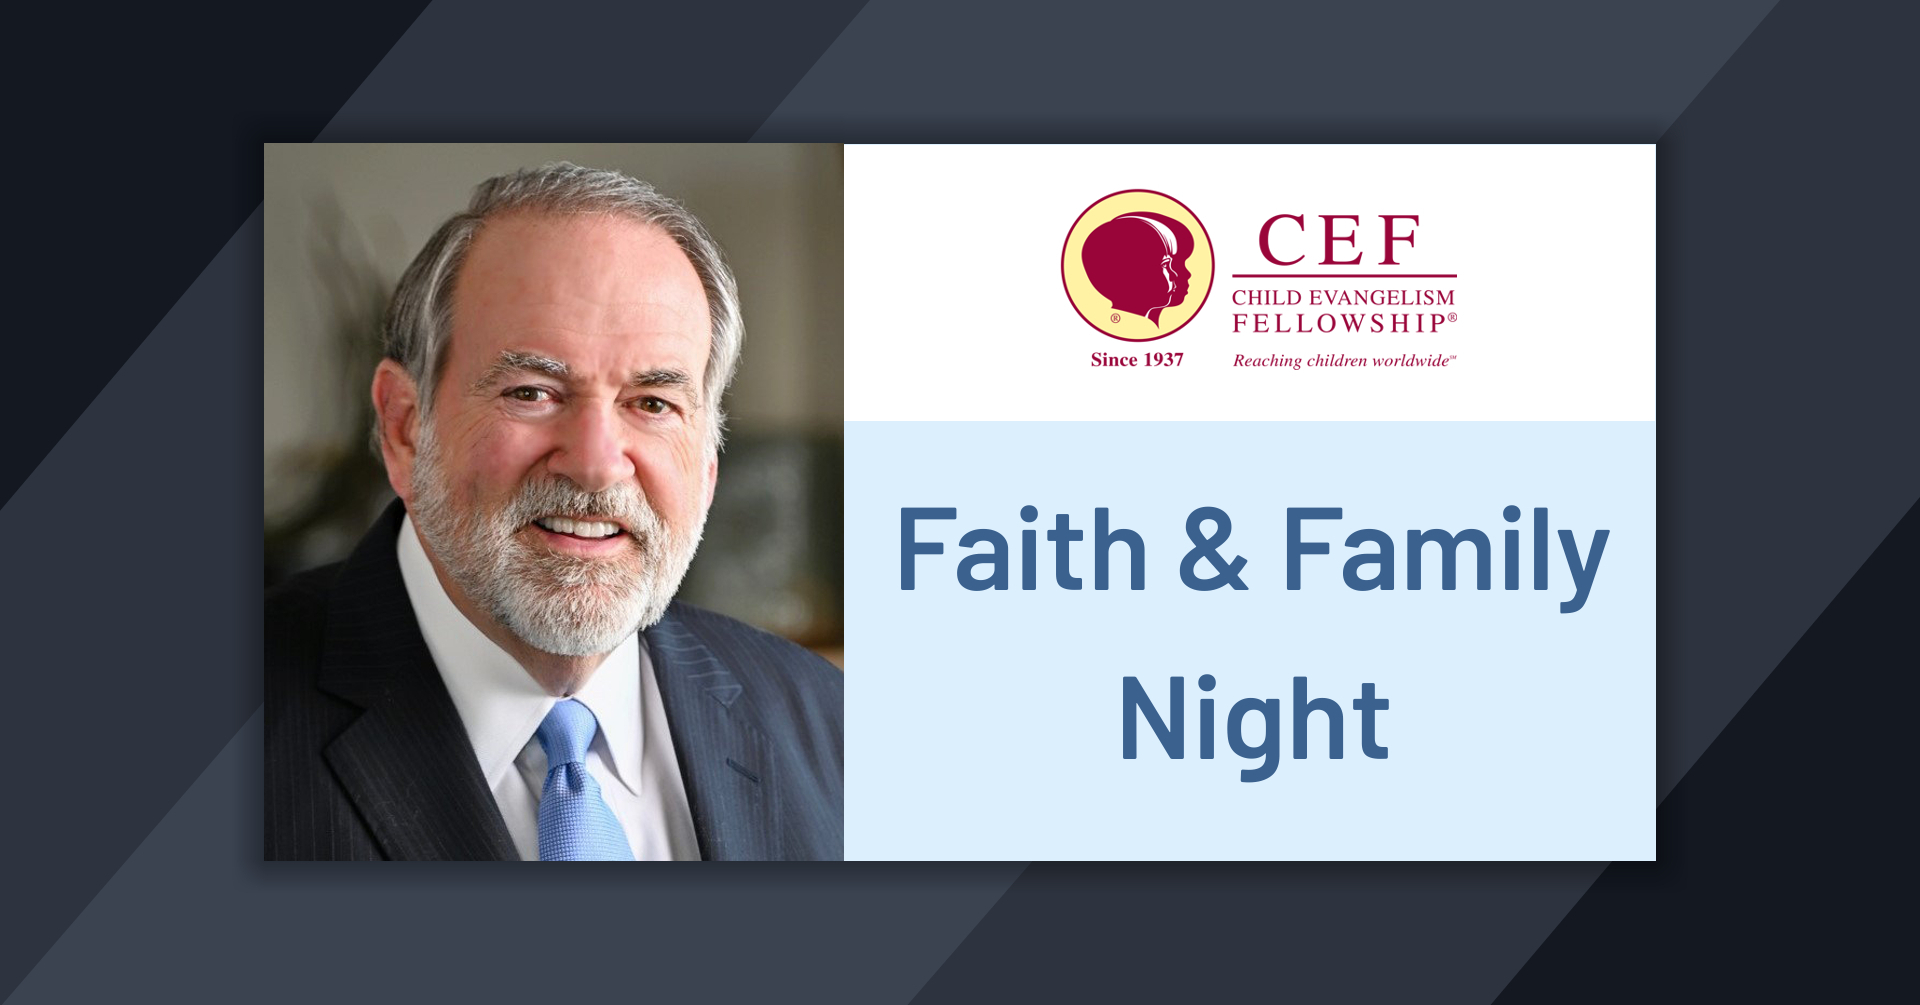 CEF Faith and Family Night with Mike Huckabee - Oct. 23 at 7pm, West Jackson Baptist Church, Jackson, Tennessee, United States